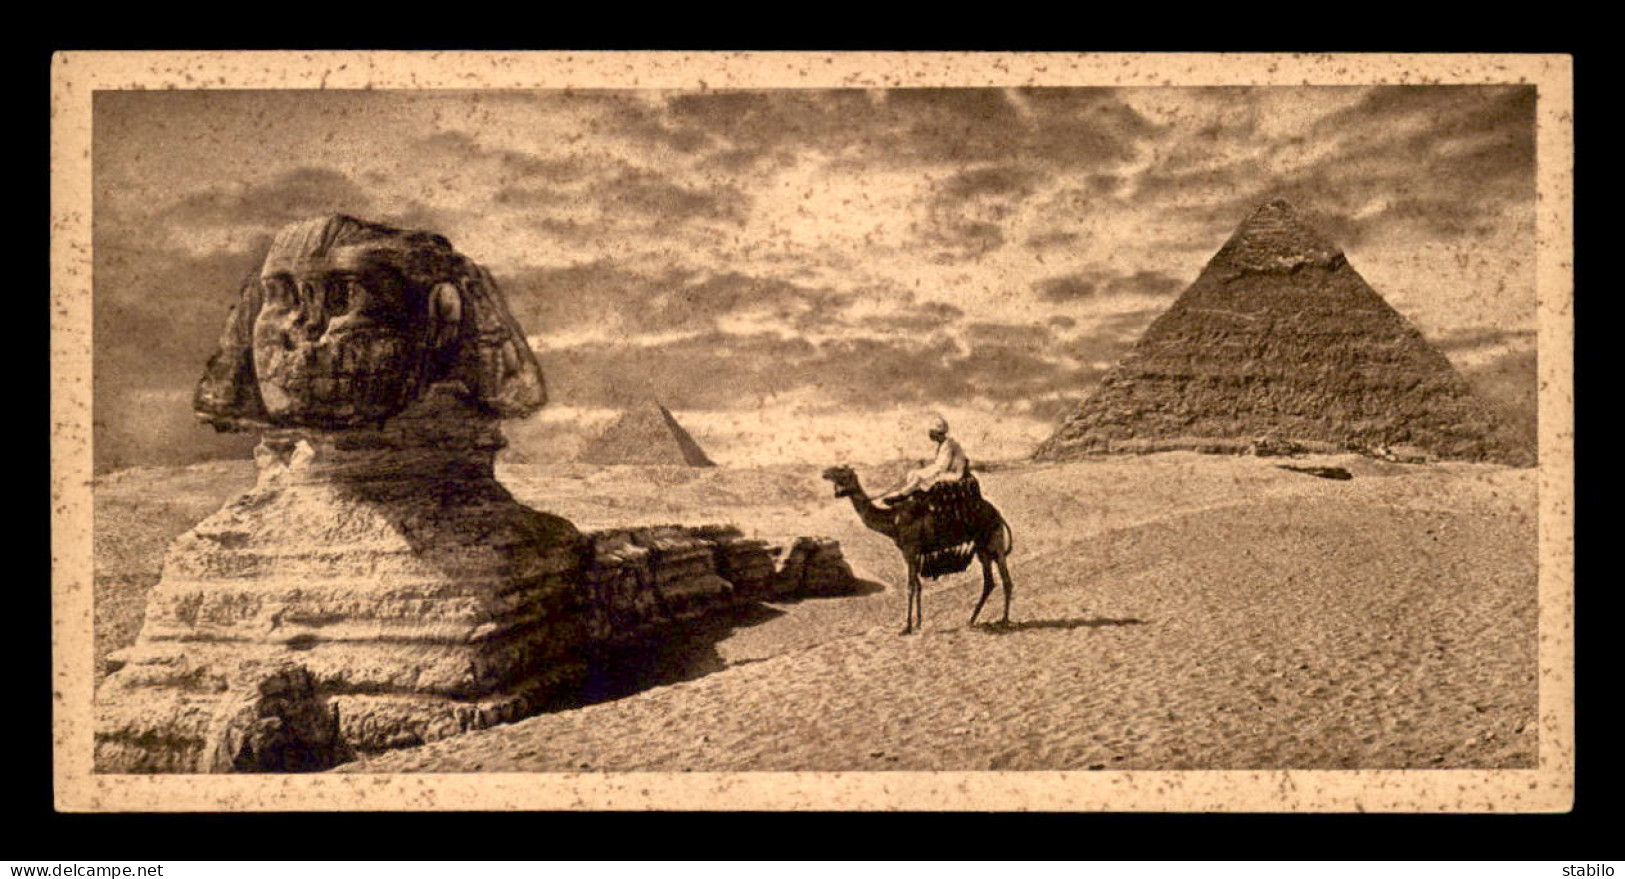 EGYPTE - LENHERT & LANDROCK N° 5 - CAIRO - SPHINX AND PYRAMIDS - FORMAT 15 X 7.5 CM - Le Caire